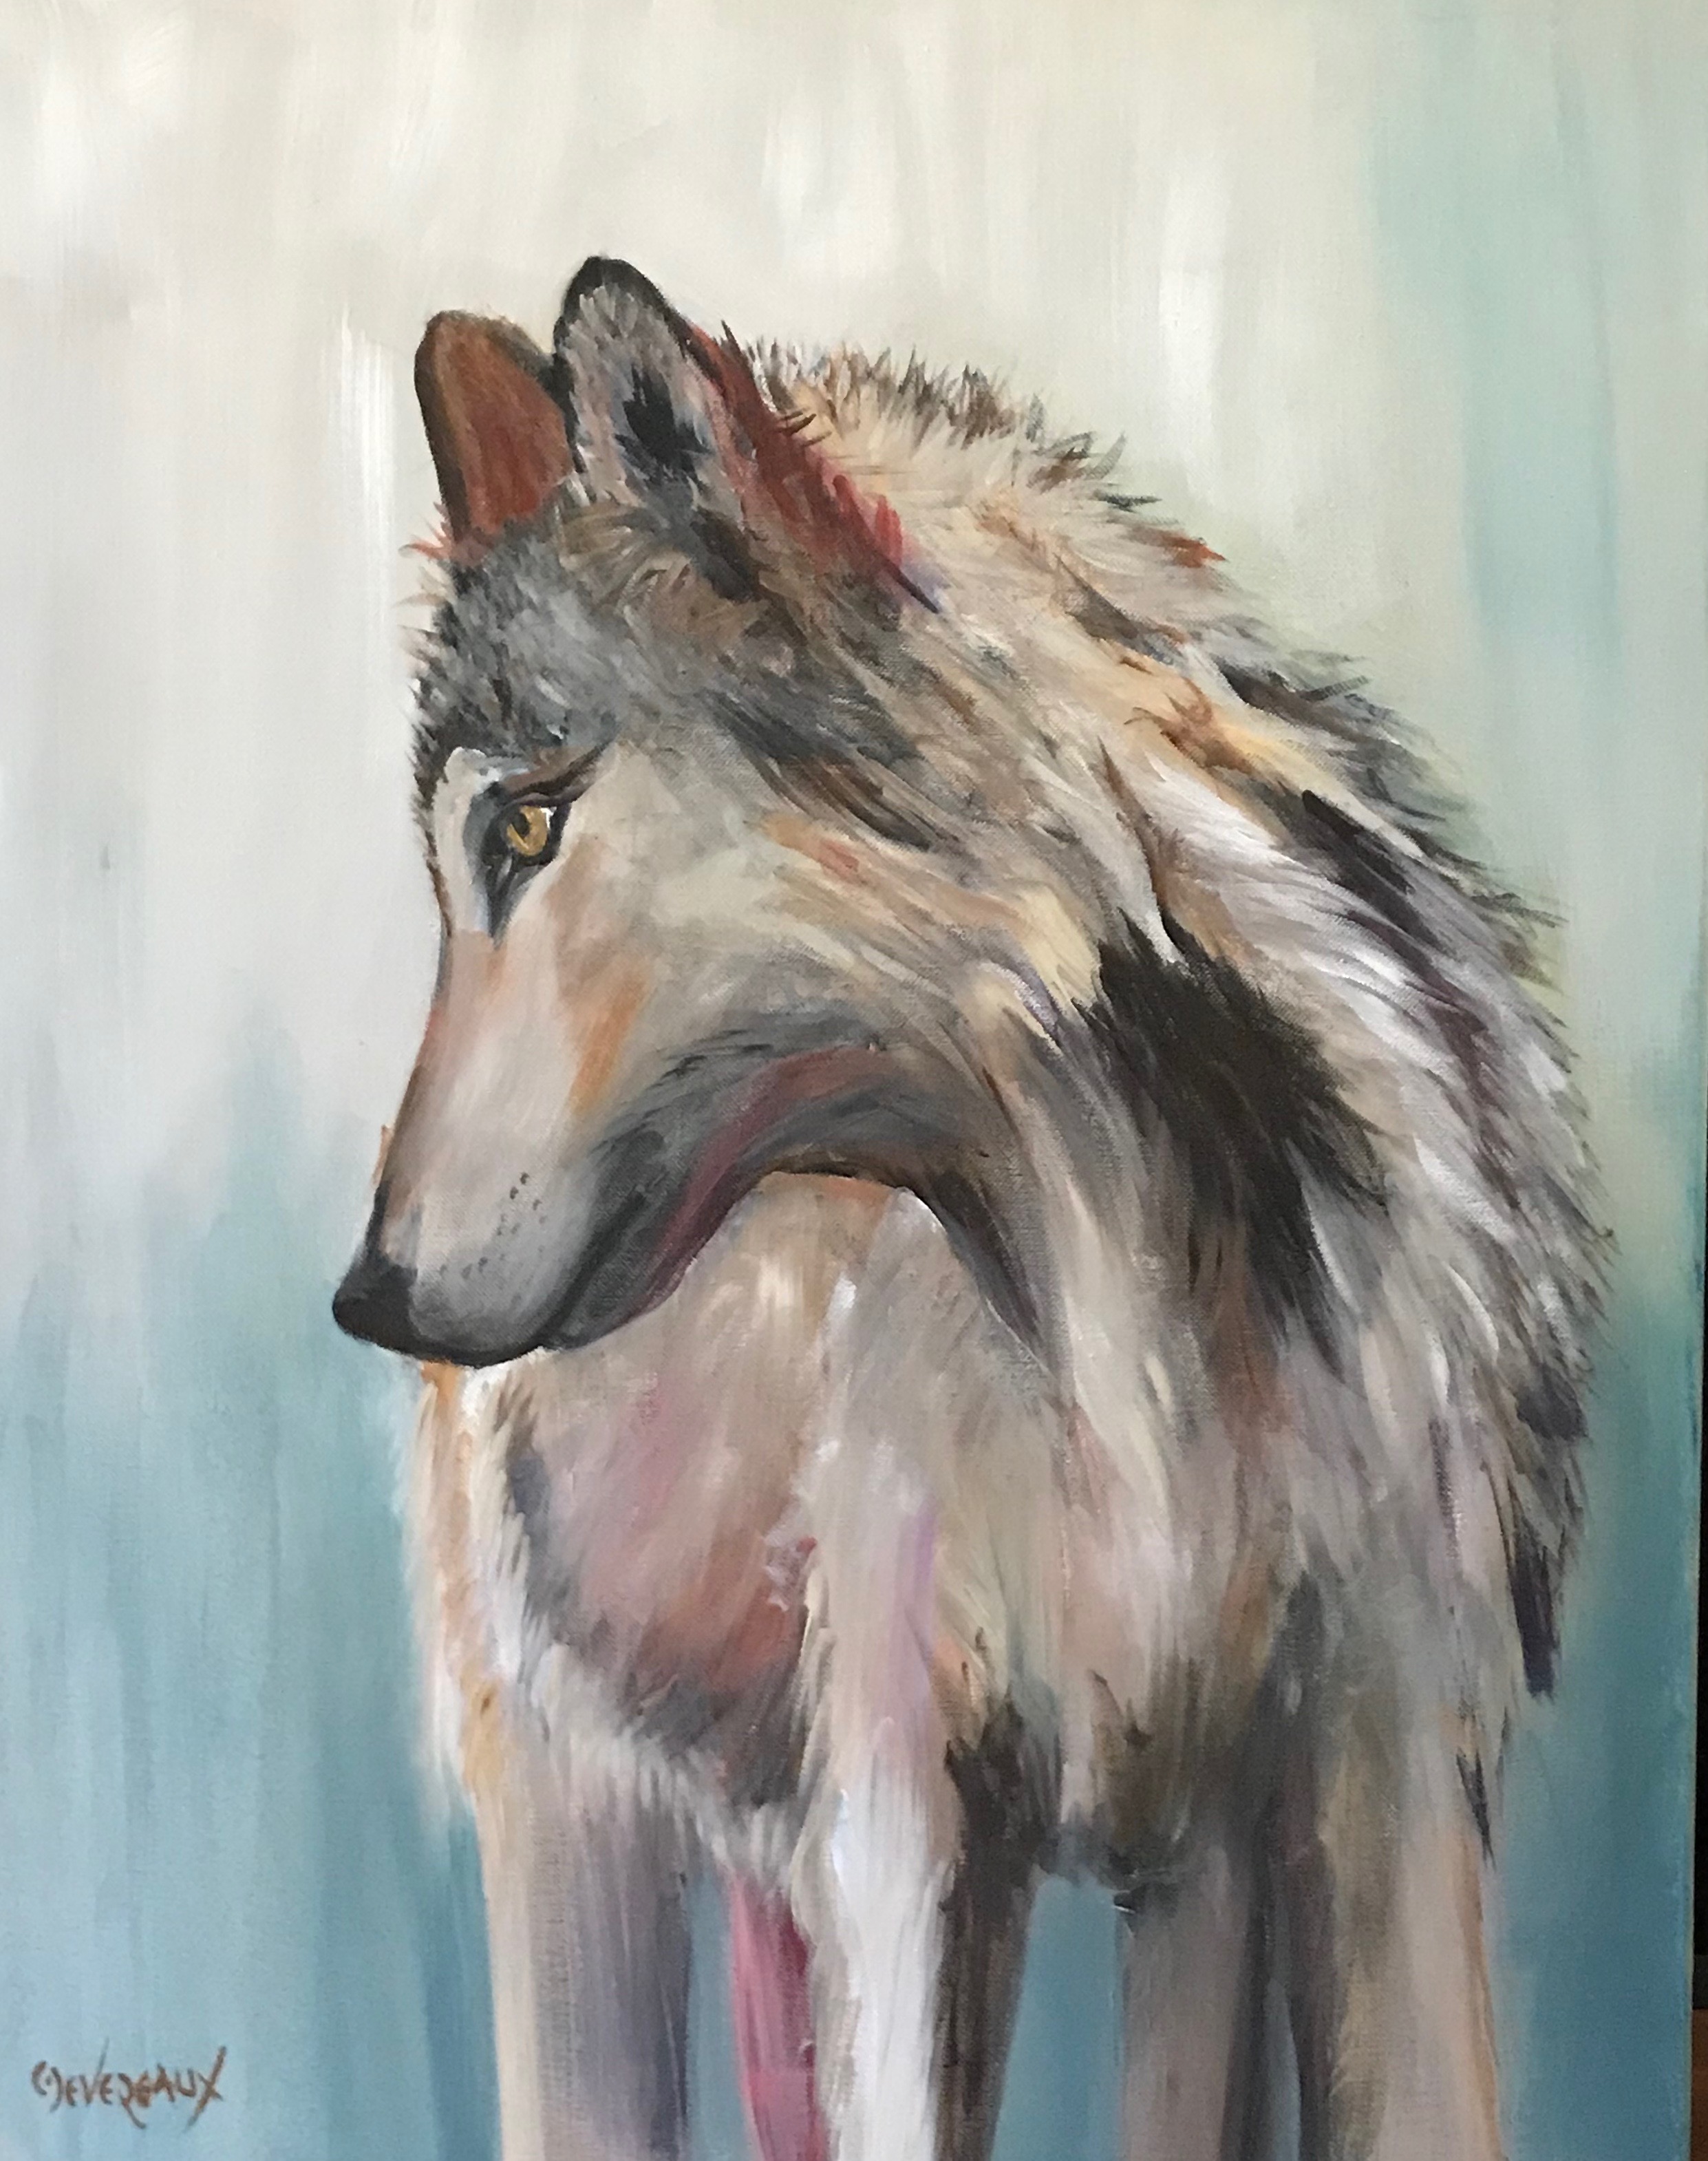 'Solo' 20x28 in  contemporary wolf painting by Cher Devereaux on stretched canvas.